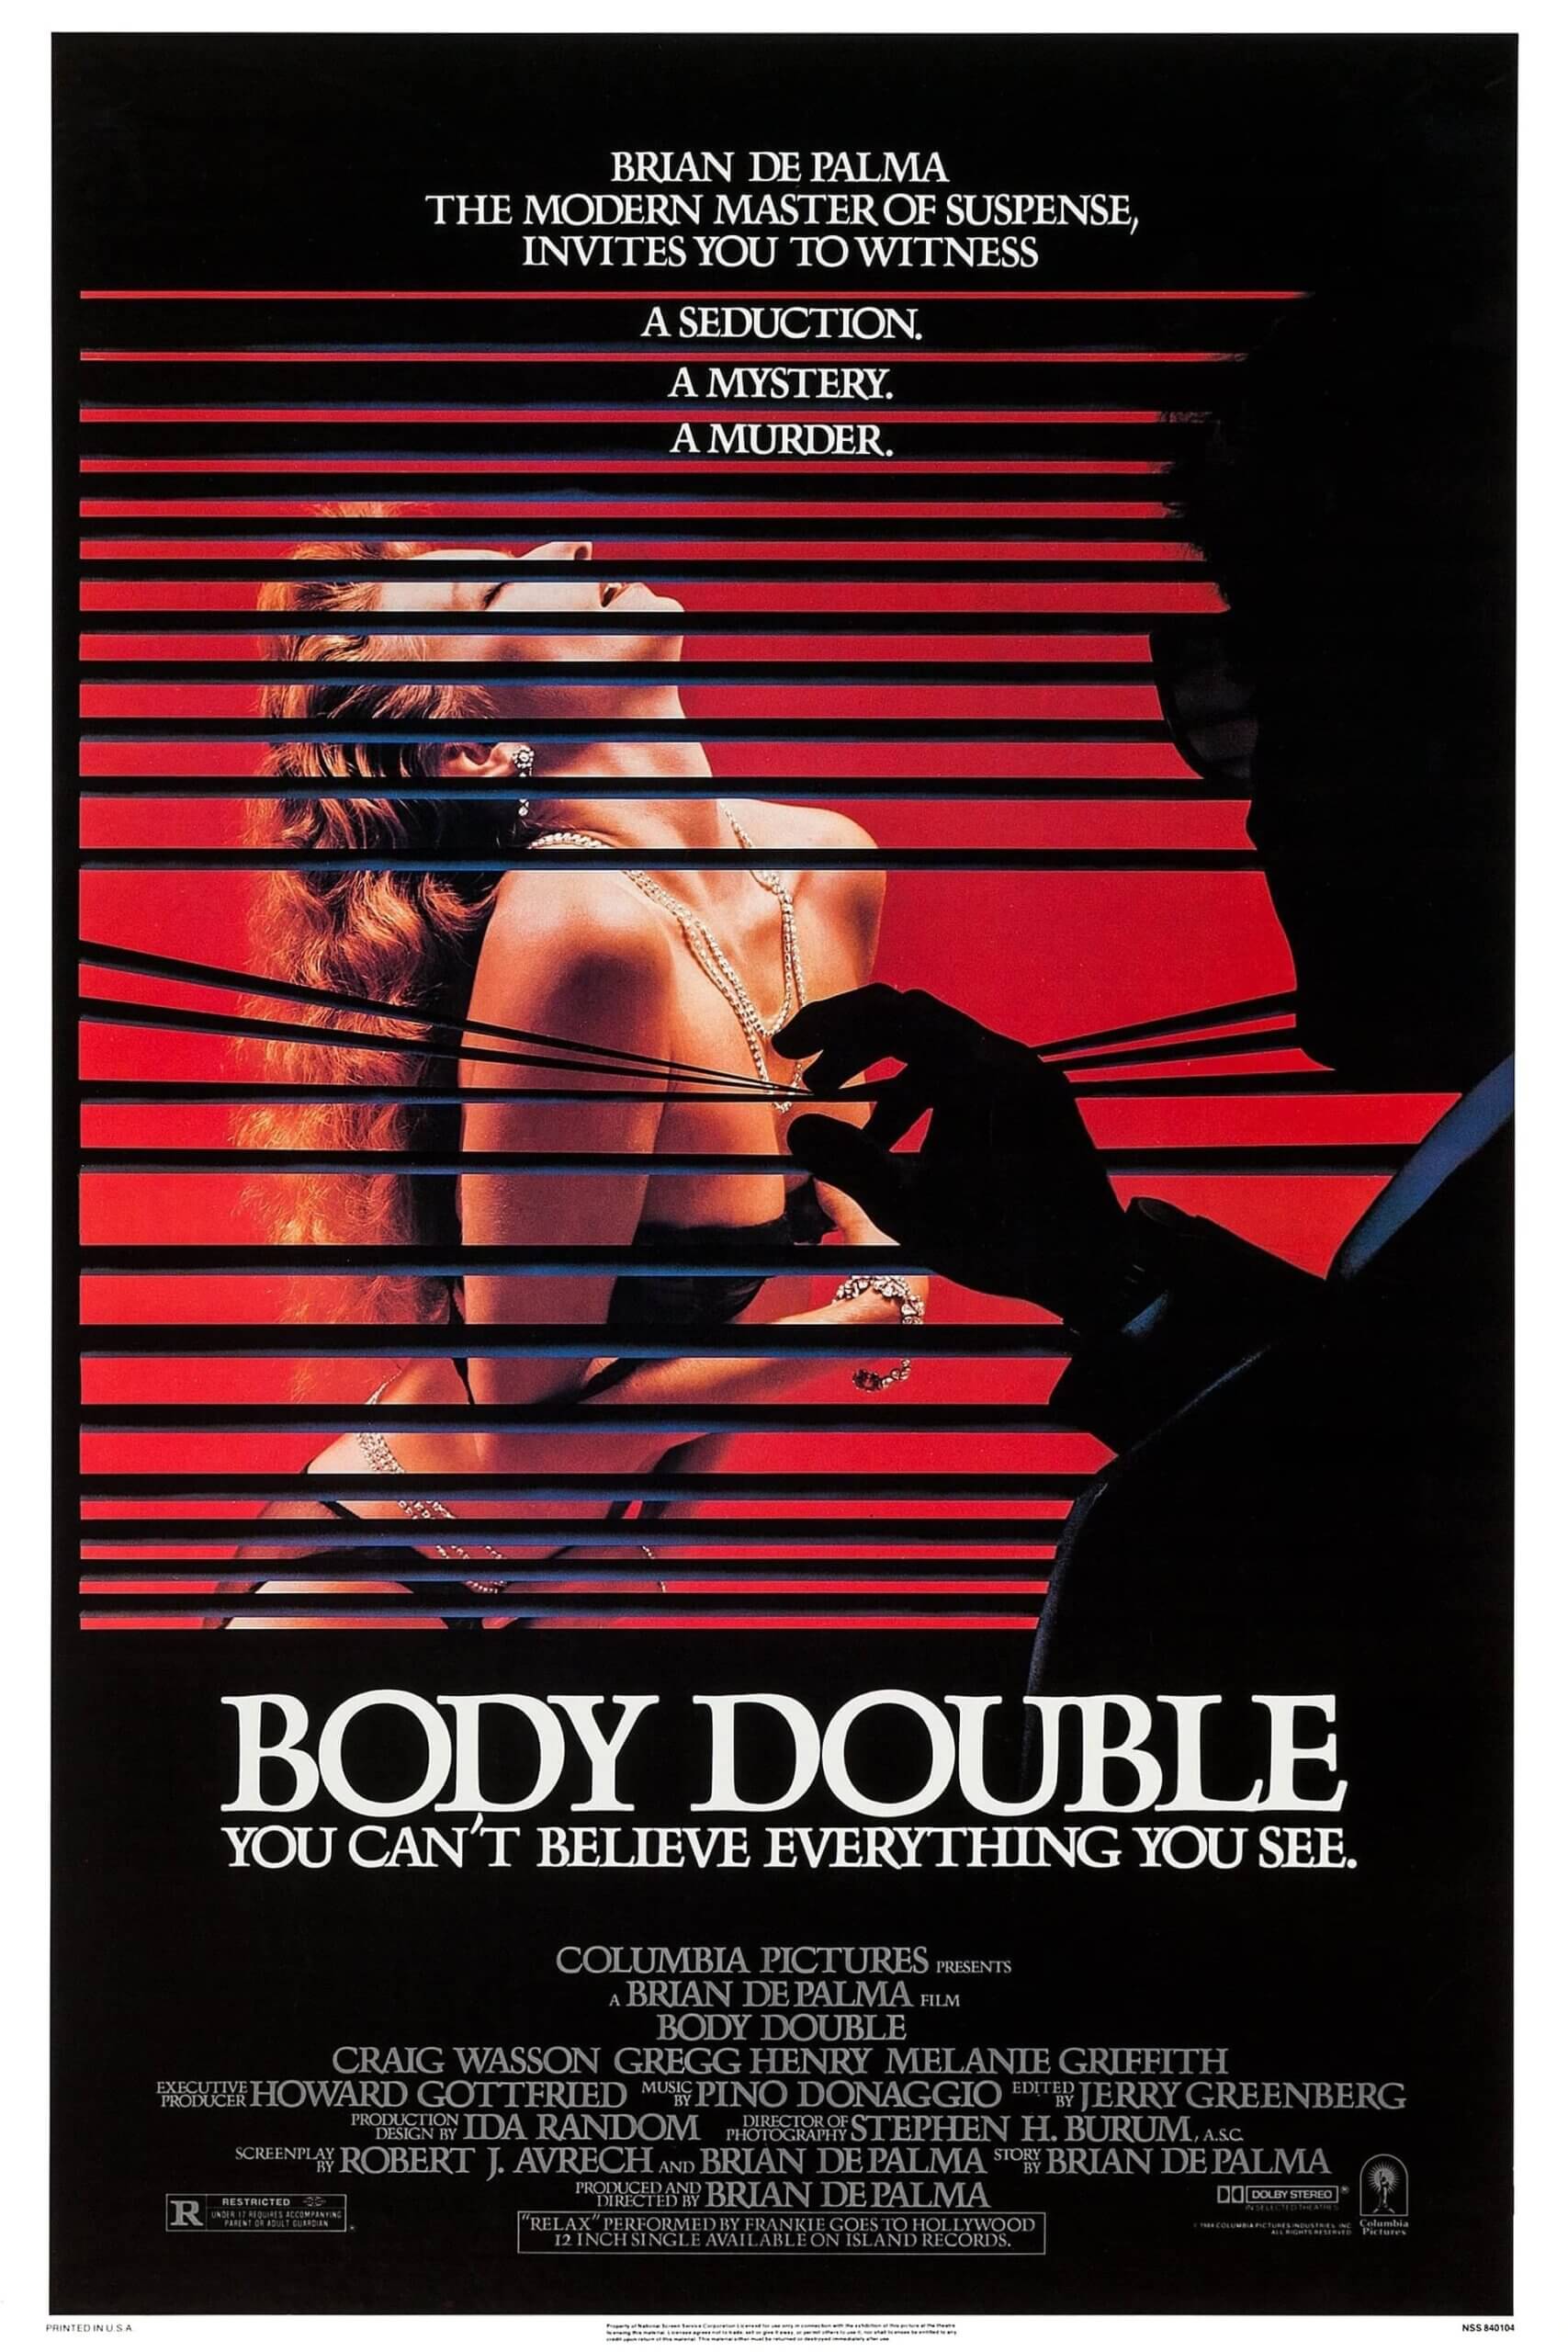 Movie poster for "Body Double"